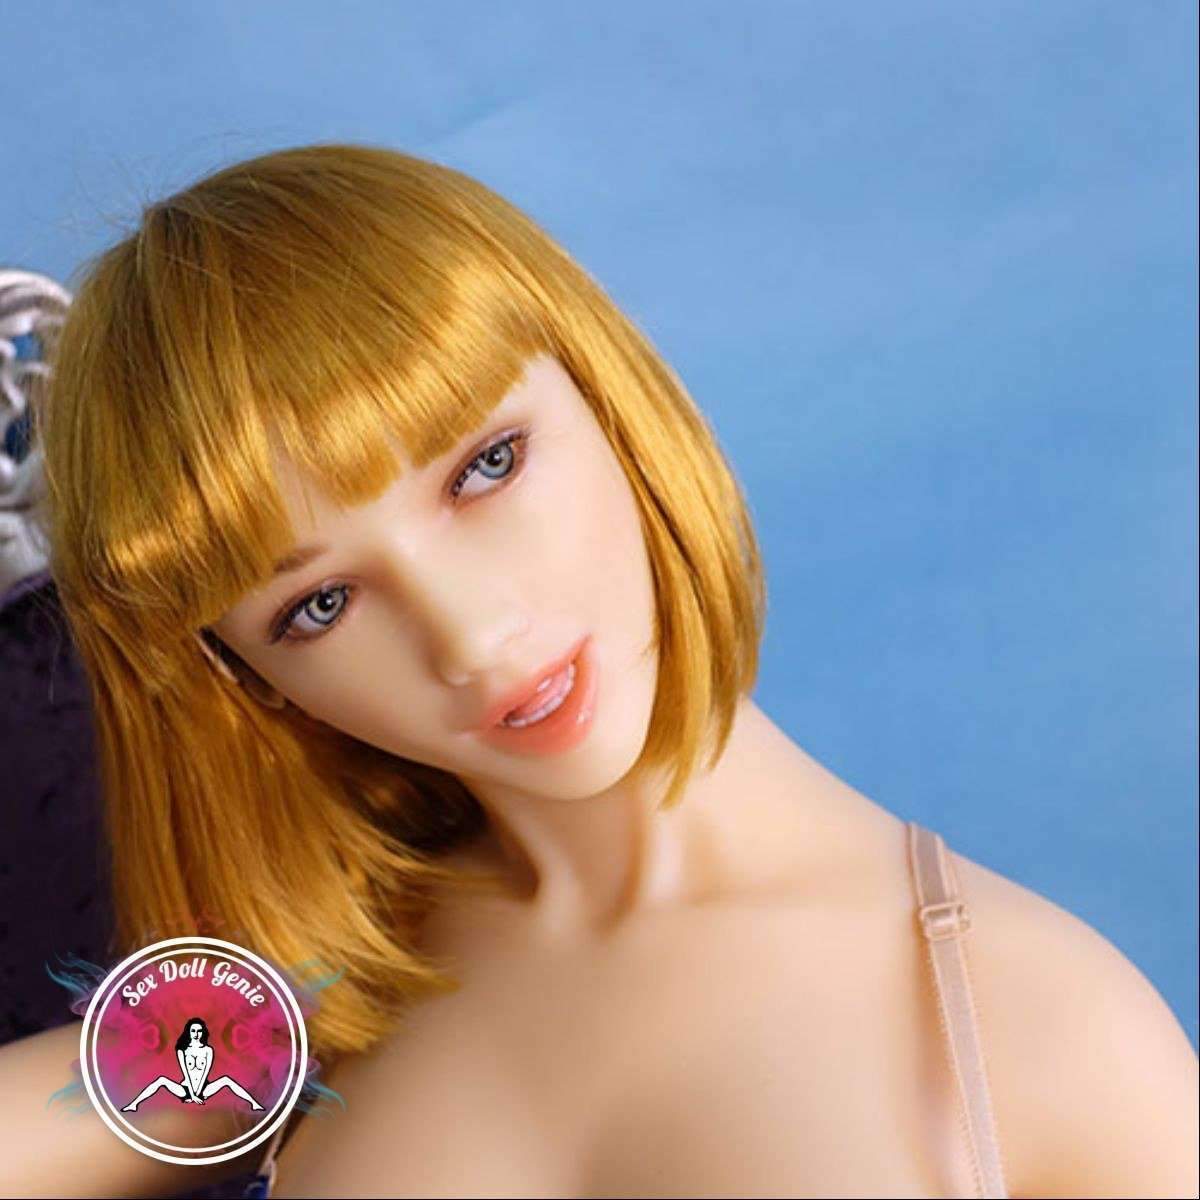 DS Doll - 158Plus - Penny Head - Type 1 D Cup Silicone Doll-15